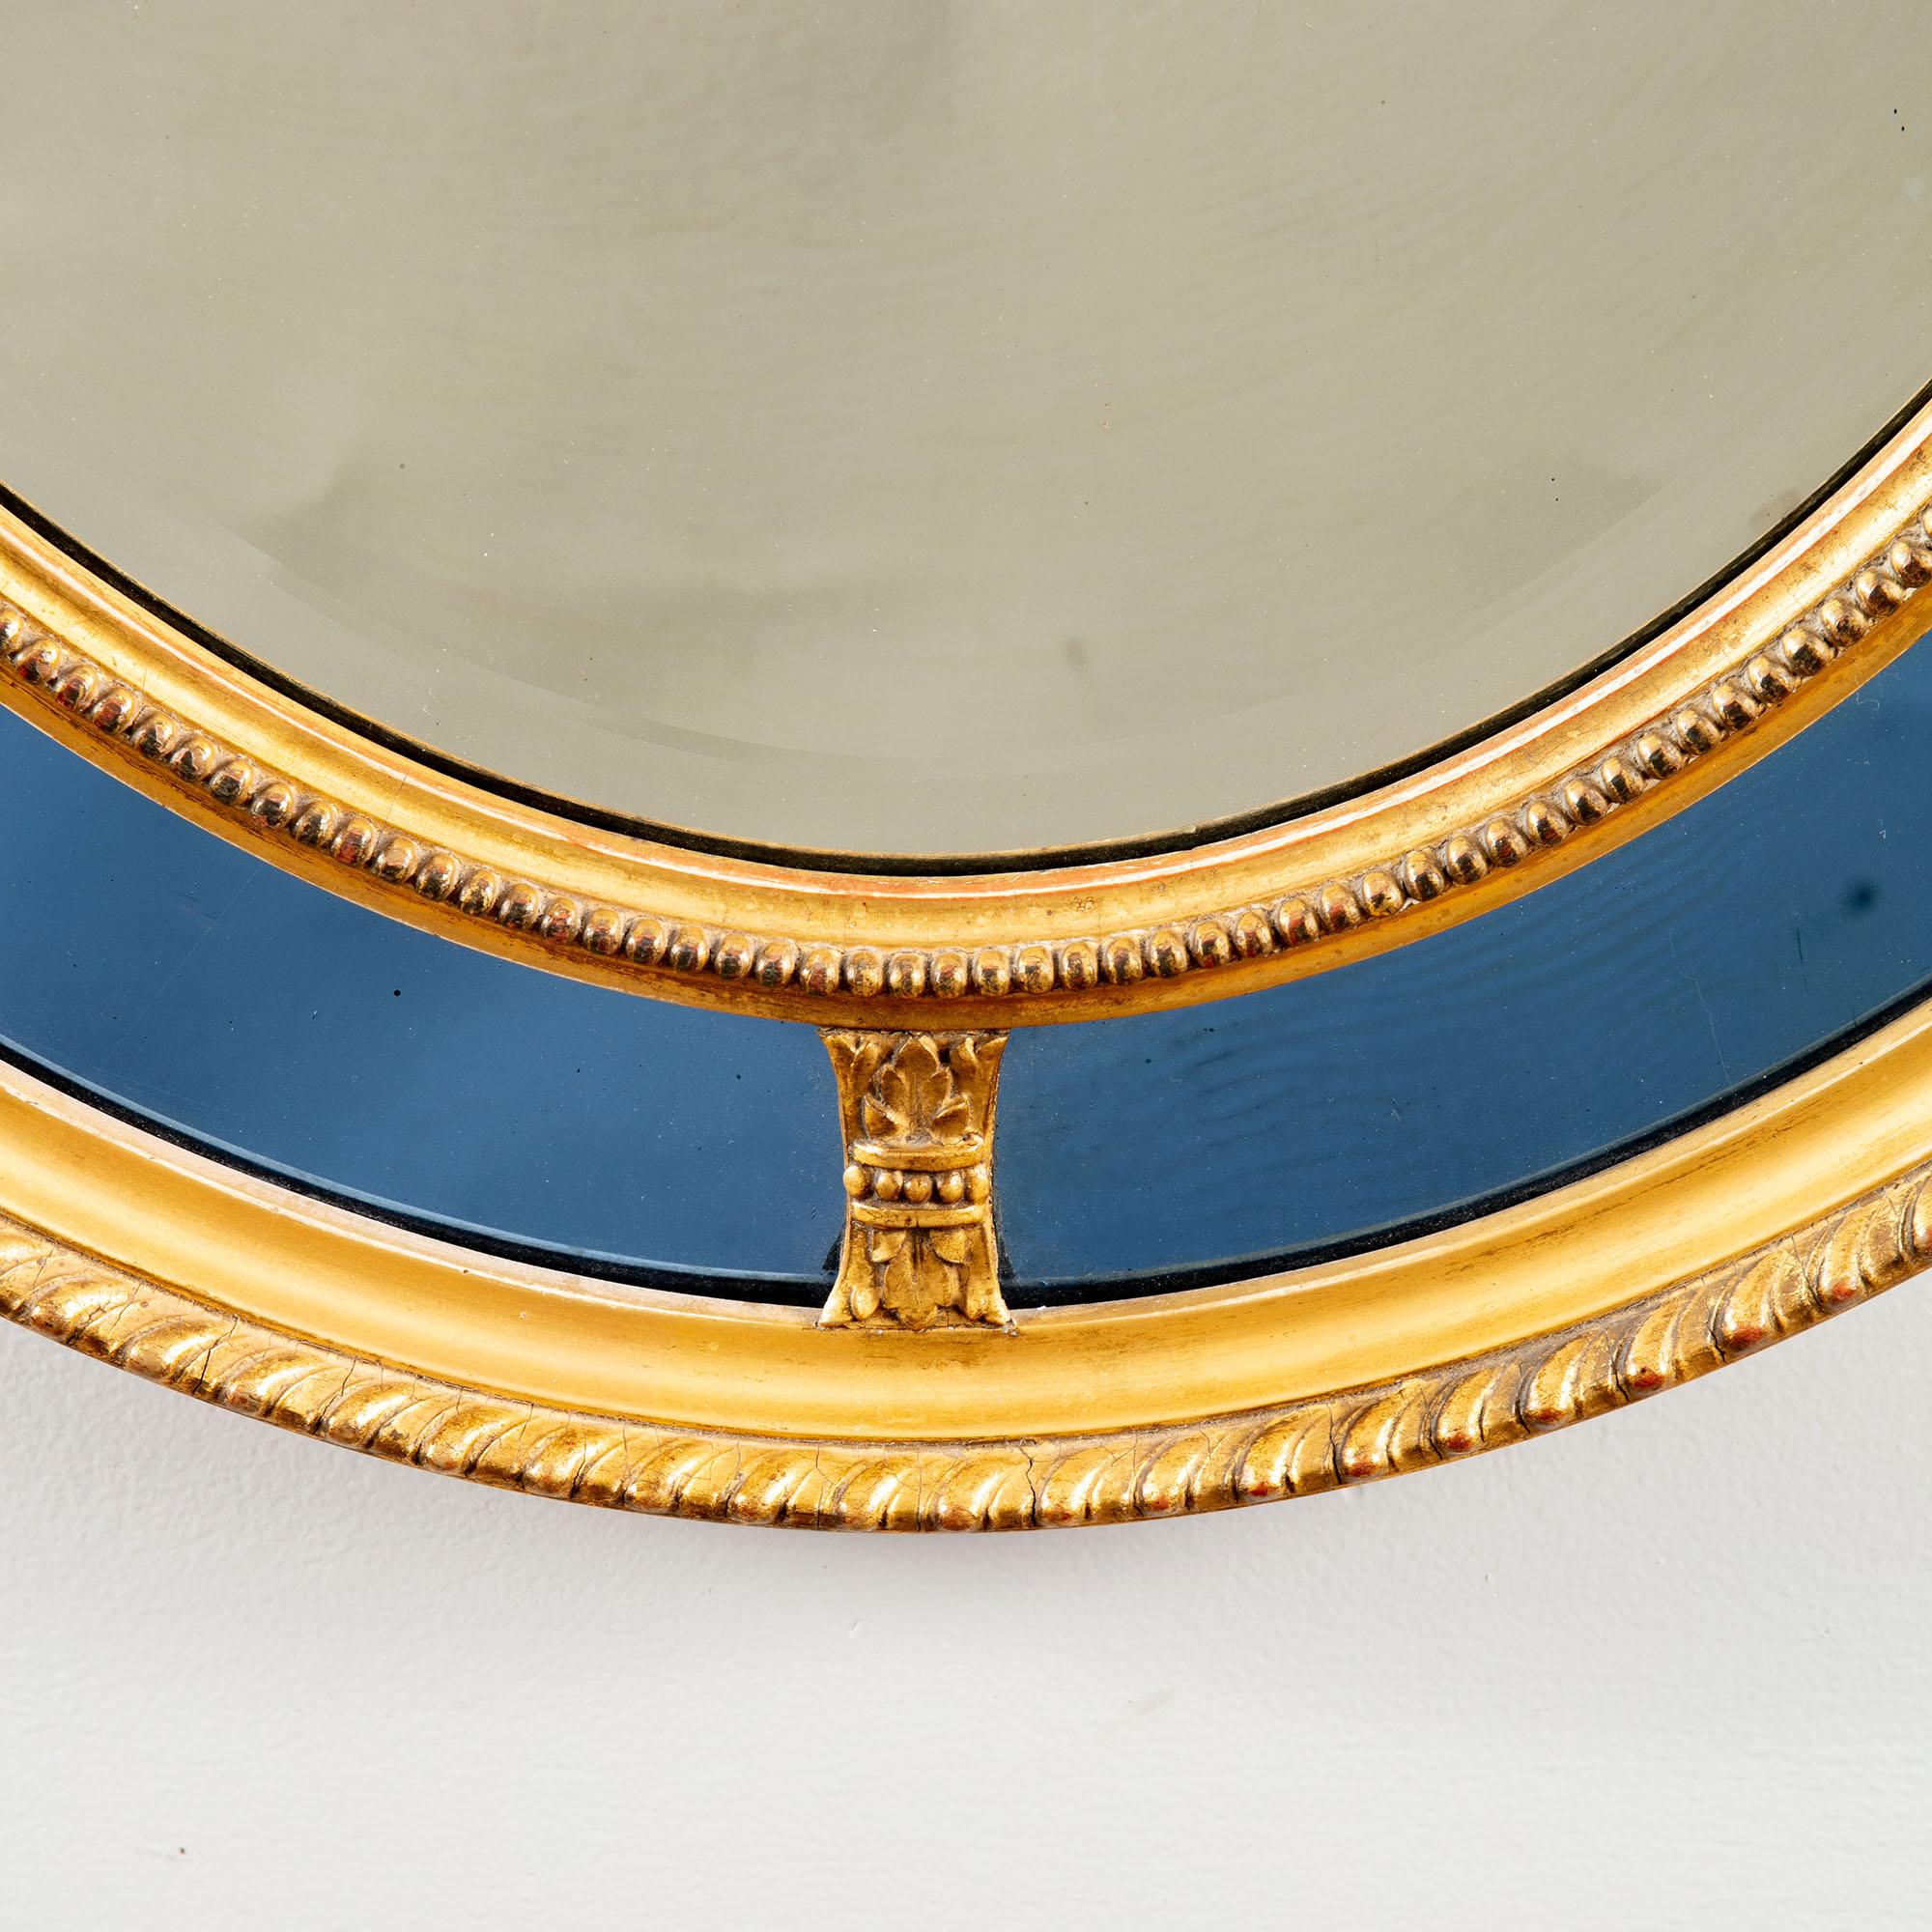 A fine mid-19th century neoclassical giltwood oval mirror with light blue border glass.

England, circa 1870

Measures: Height 33 ins / 84cm

Width 25 ins / 63.5 cm.